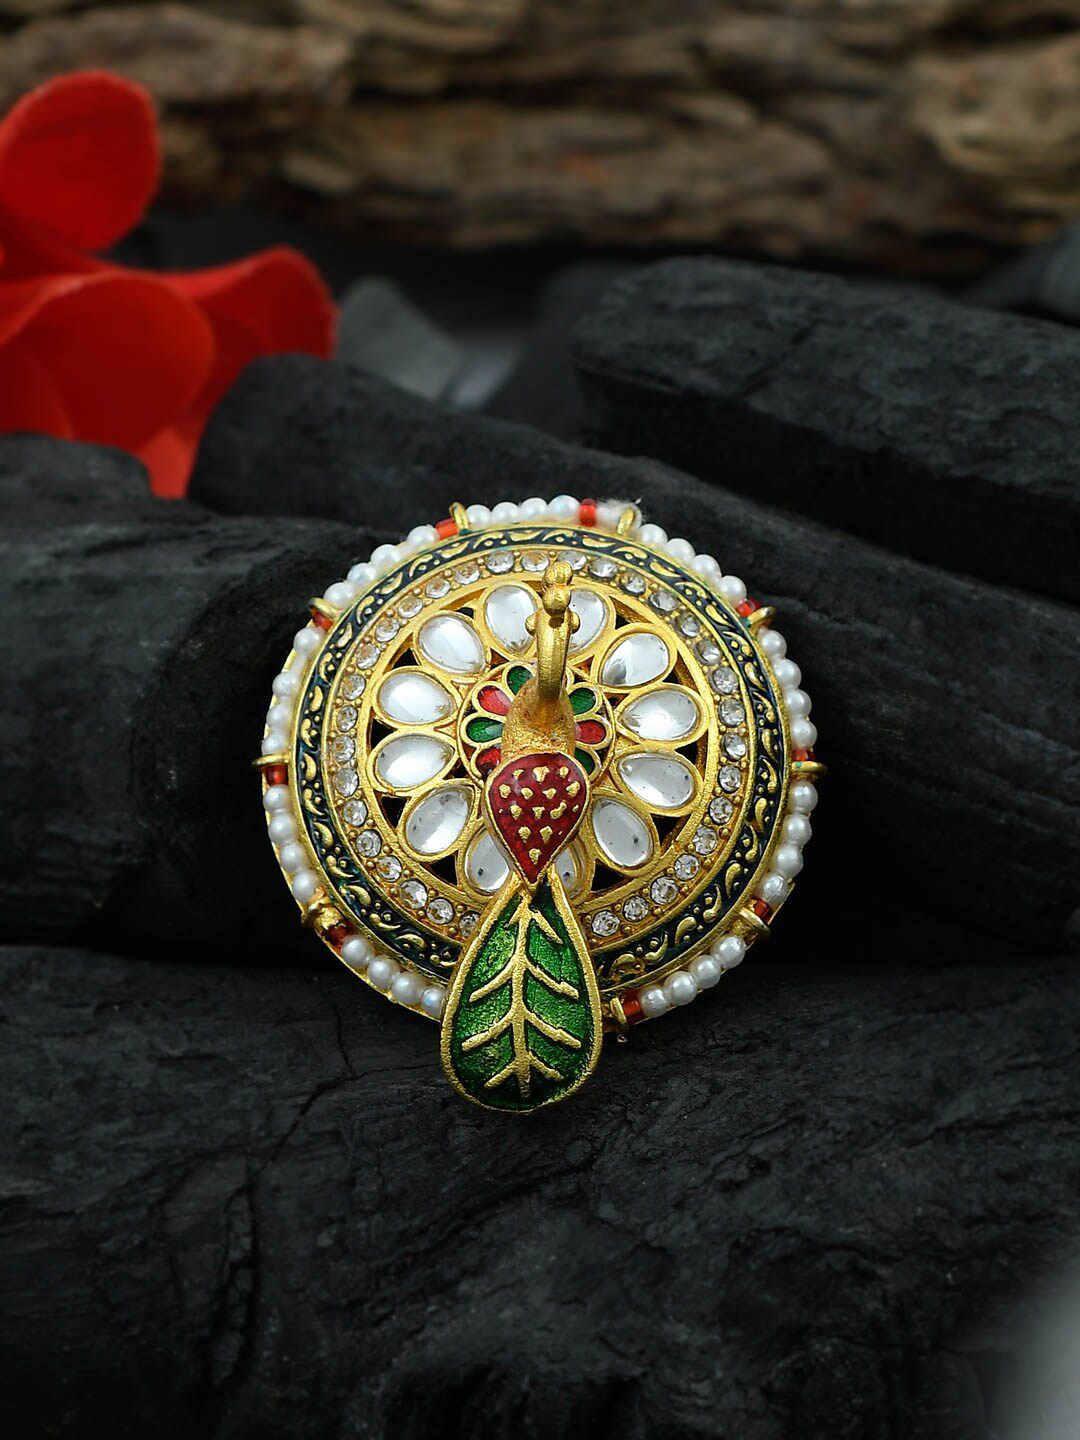 Silvermerc Designs Gold-Plated Green & White Pearl Embellished Meenakari Adjustable Finger Ring Price in India